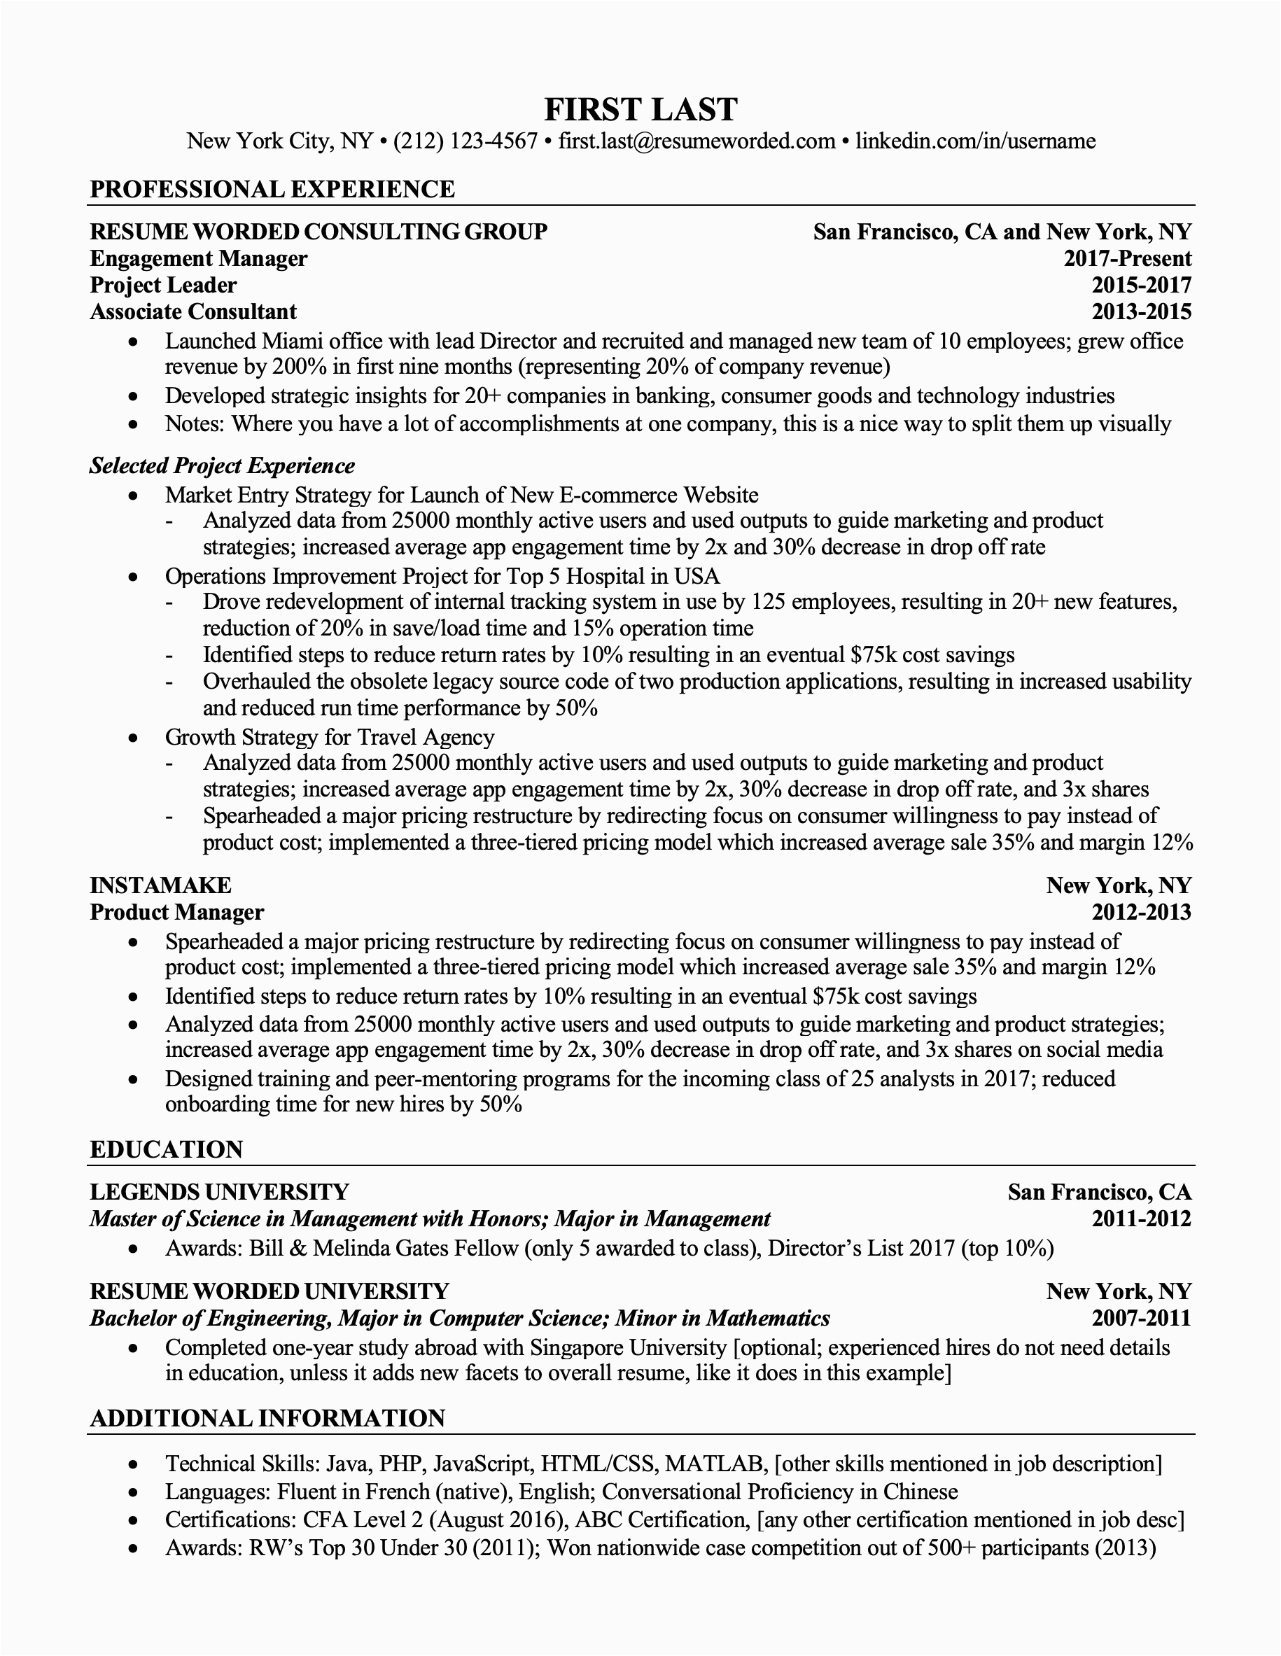 Sample Resume with Multiple Positions at Same Company Professional Sample Resume Multiple Positions Same Pany